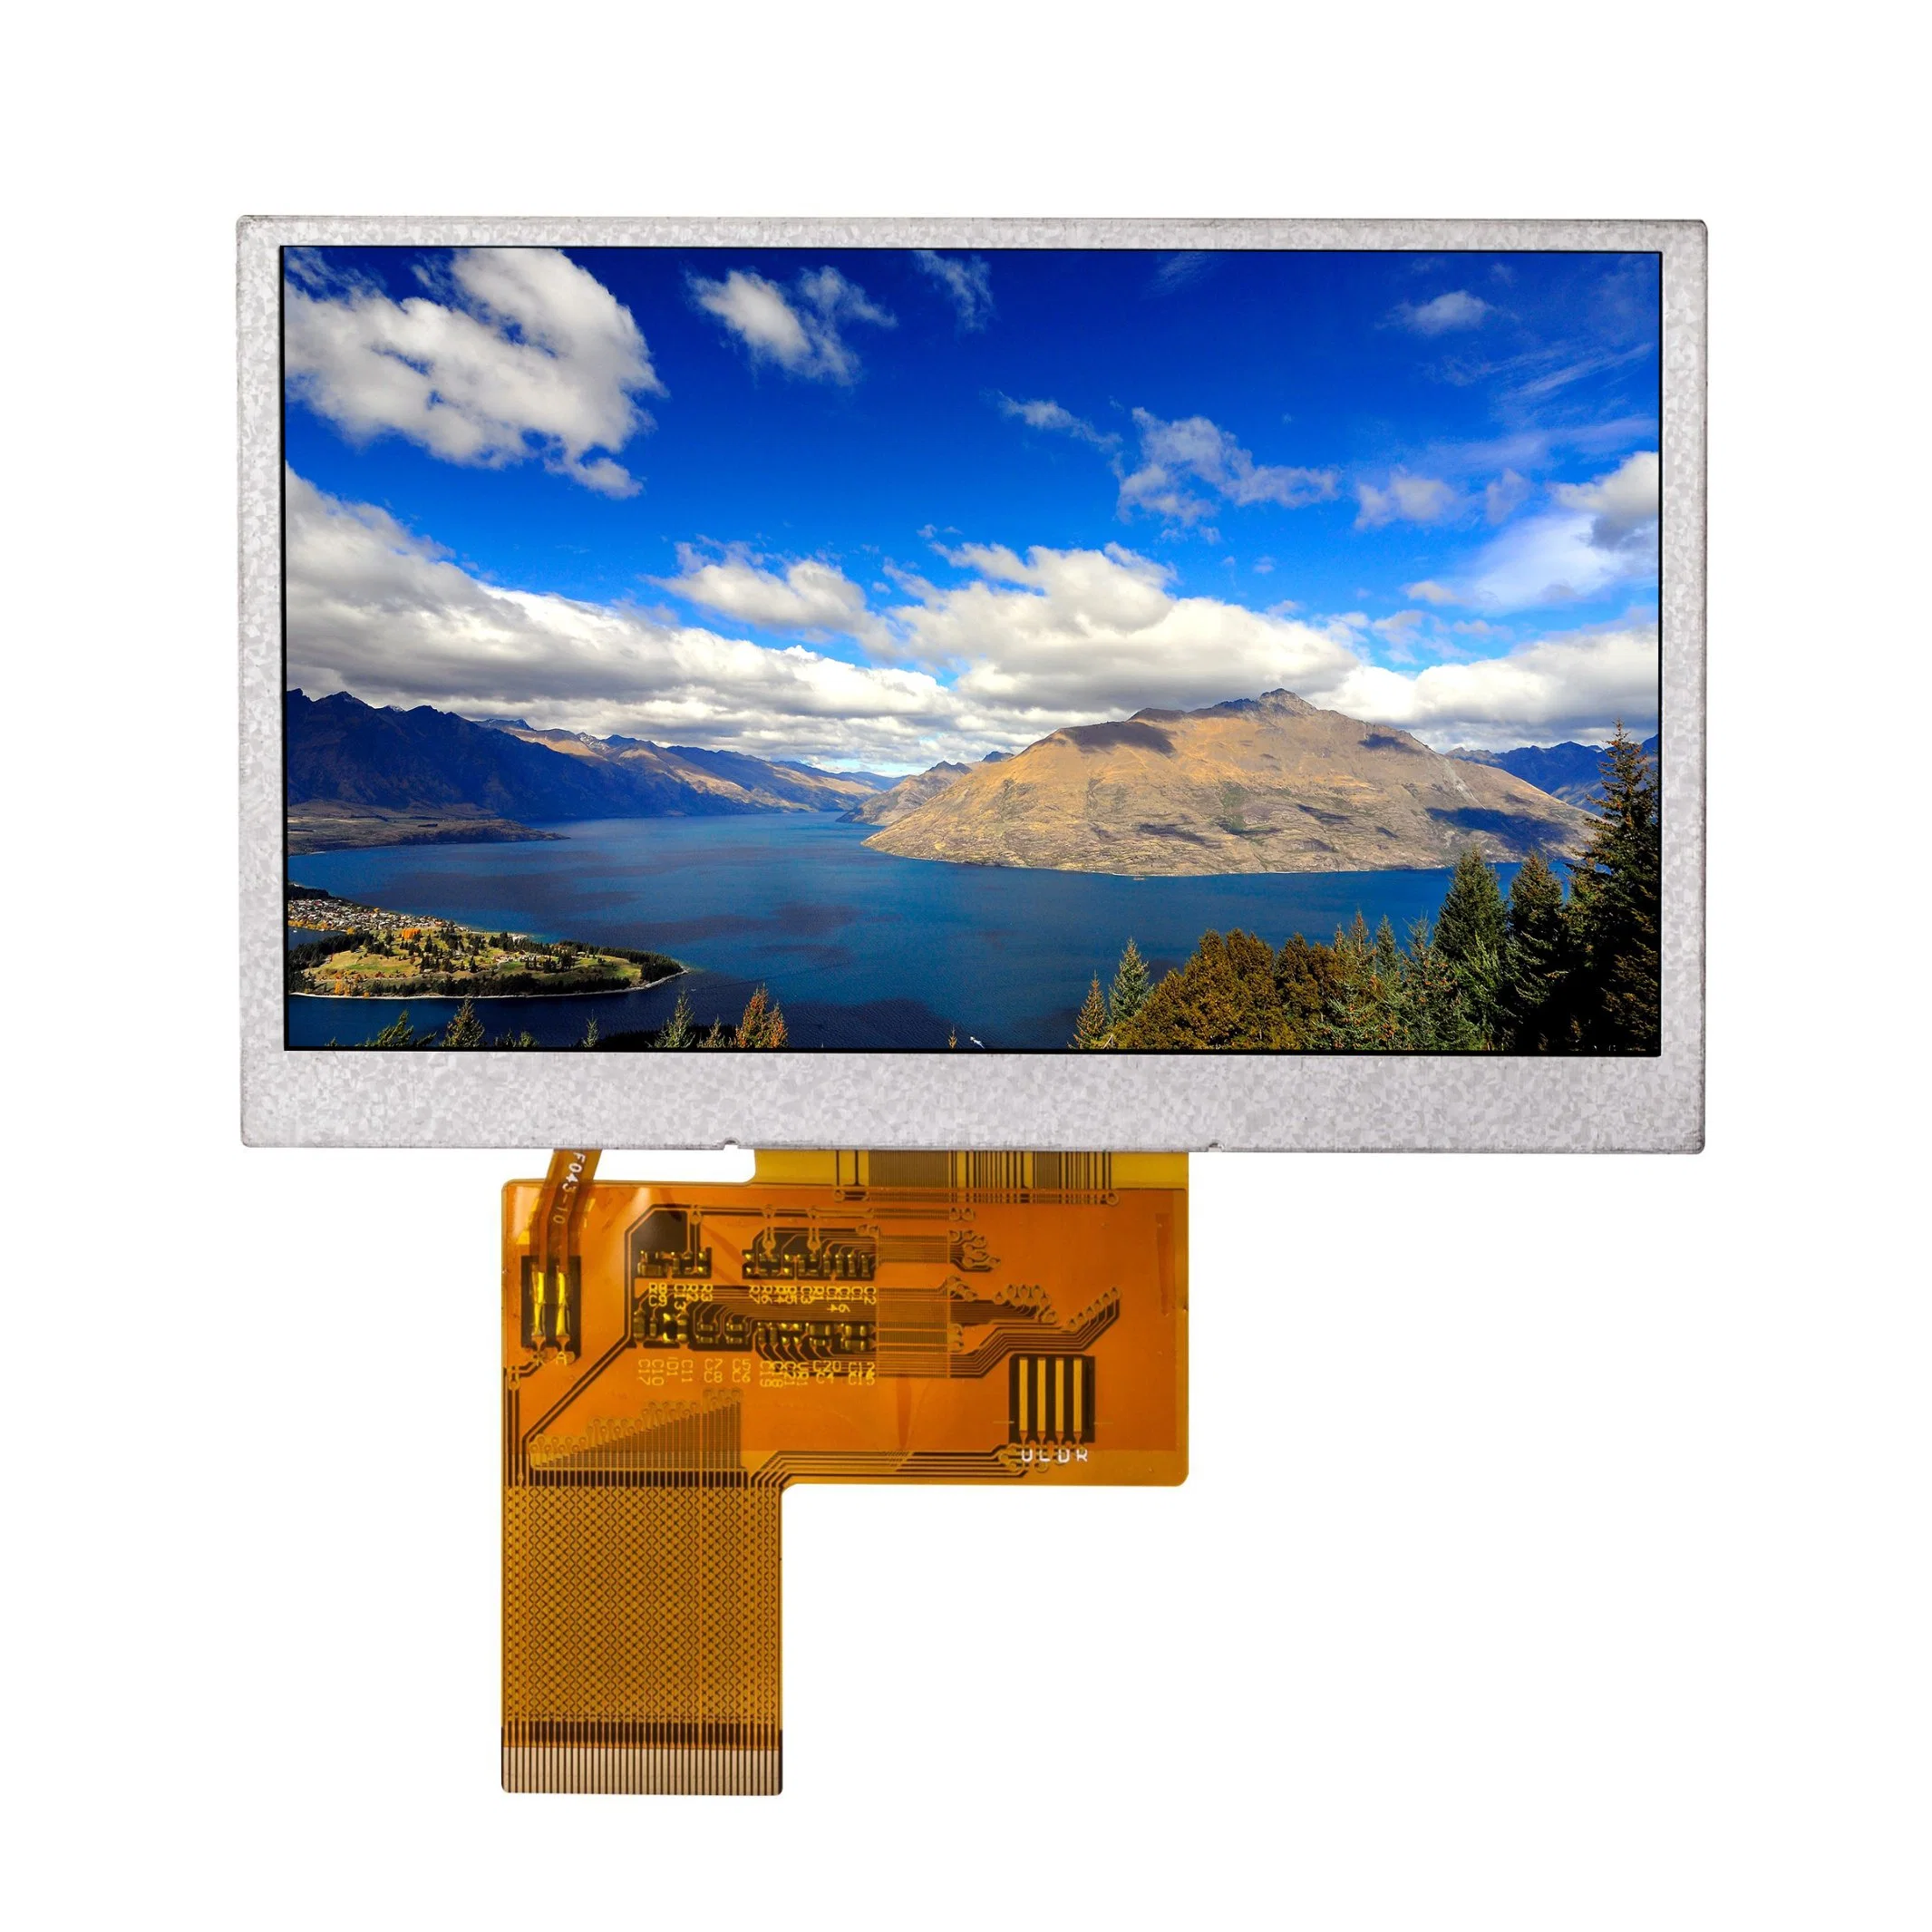 800X480 480X272 TFT LCD Display Screen Monitor with Touch Screen